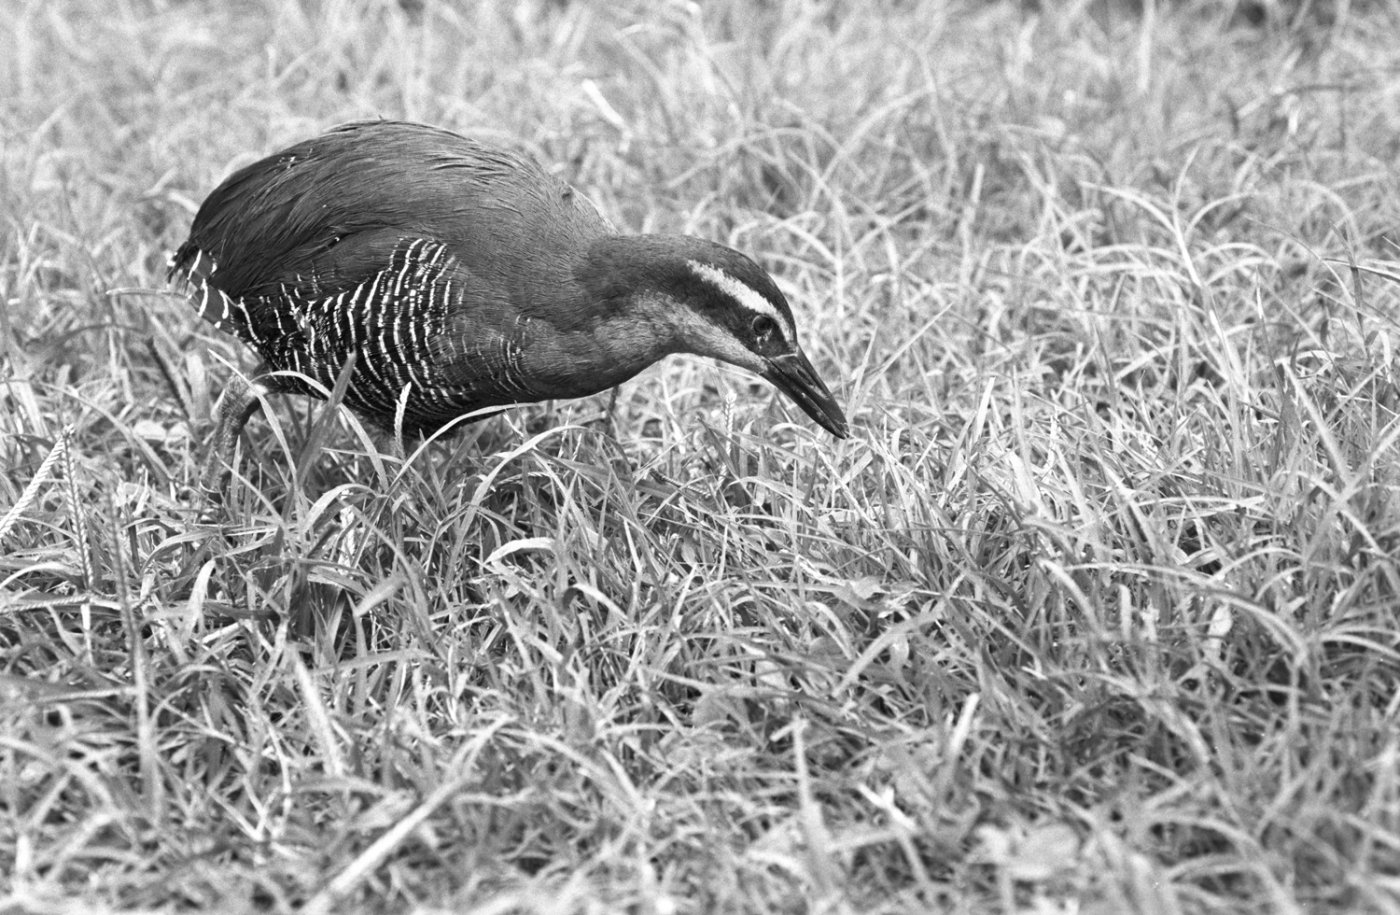 A black-and-white image of a small bird, called a Guam rail, walking through the grass at the Smithsonian Conservation Biology Institute in 1994